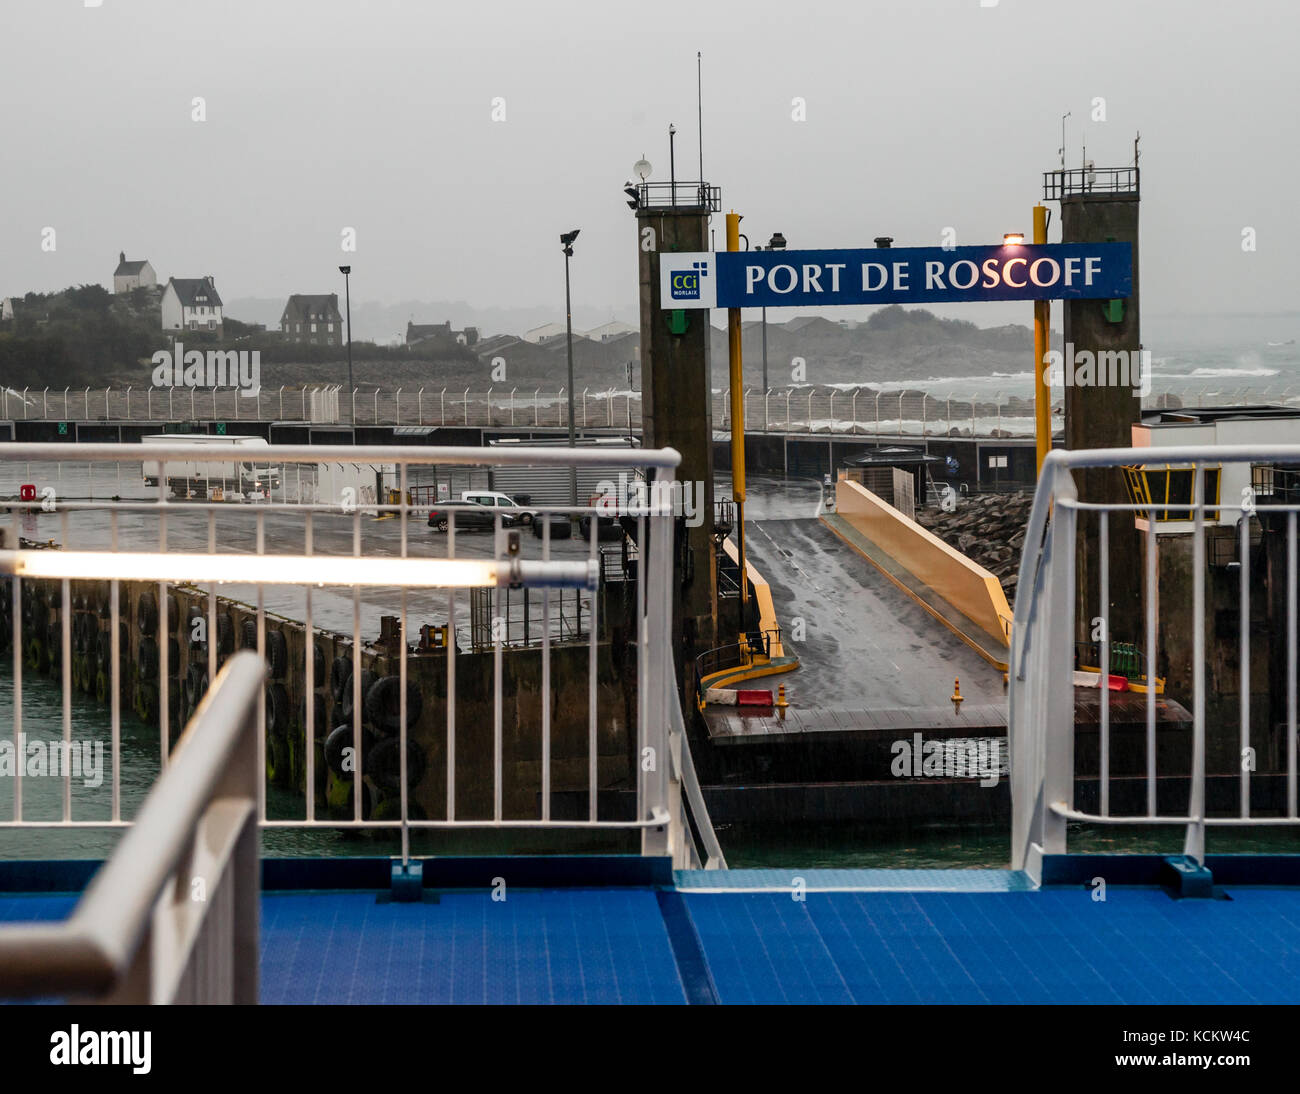 The Armorique on its last meters before the pier in the port of Roscoff. Roscoff Harbor view from Ferry onboard the Armorique Ferry of Brittany Ferries, Roscoff-Morlaix, France - In the mist on the hill you can see the Saint-Barbe chapel. Stock Photo